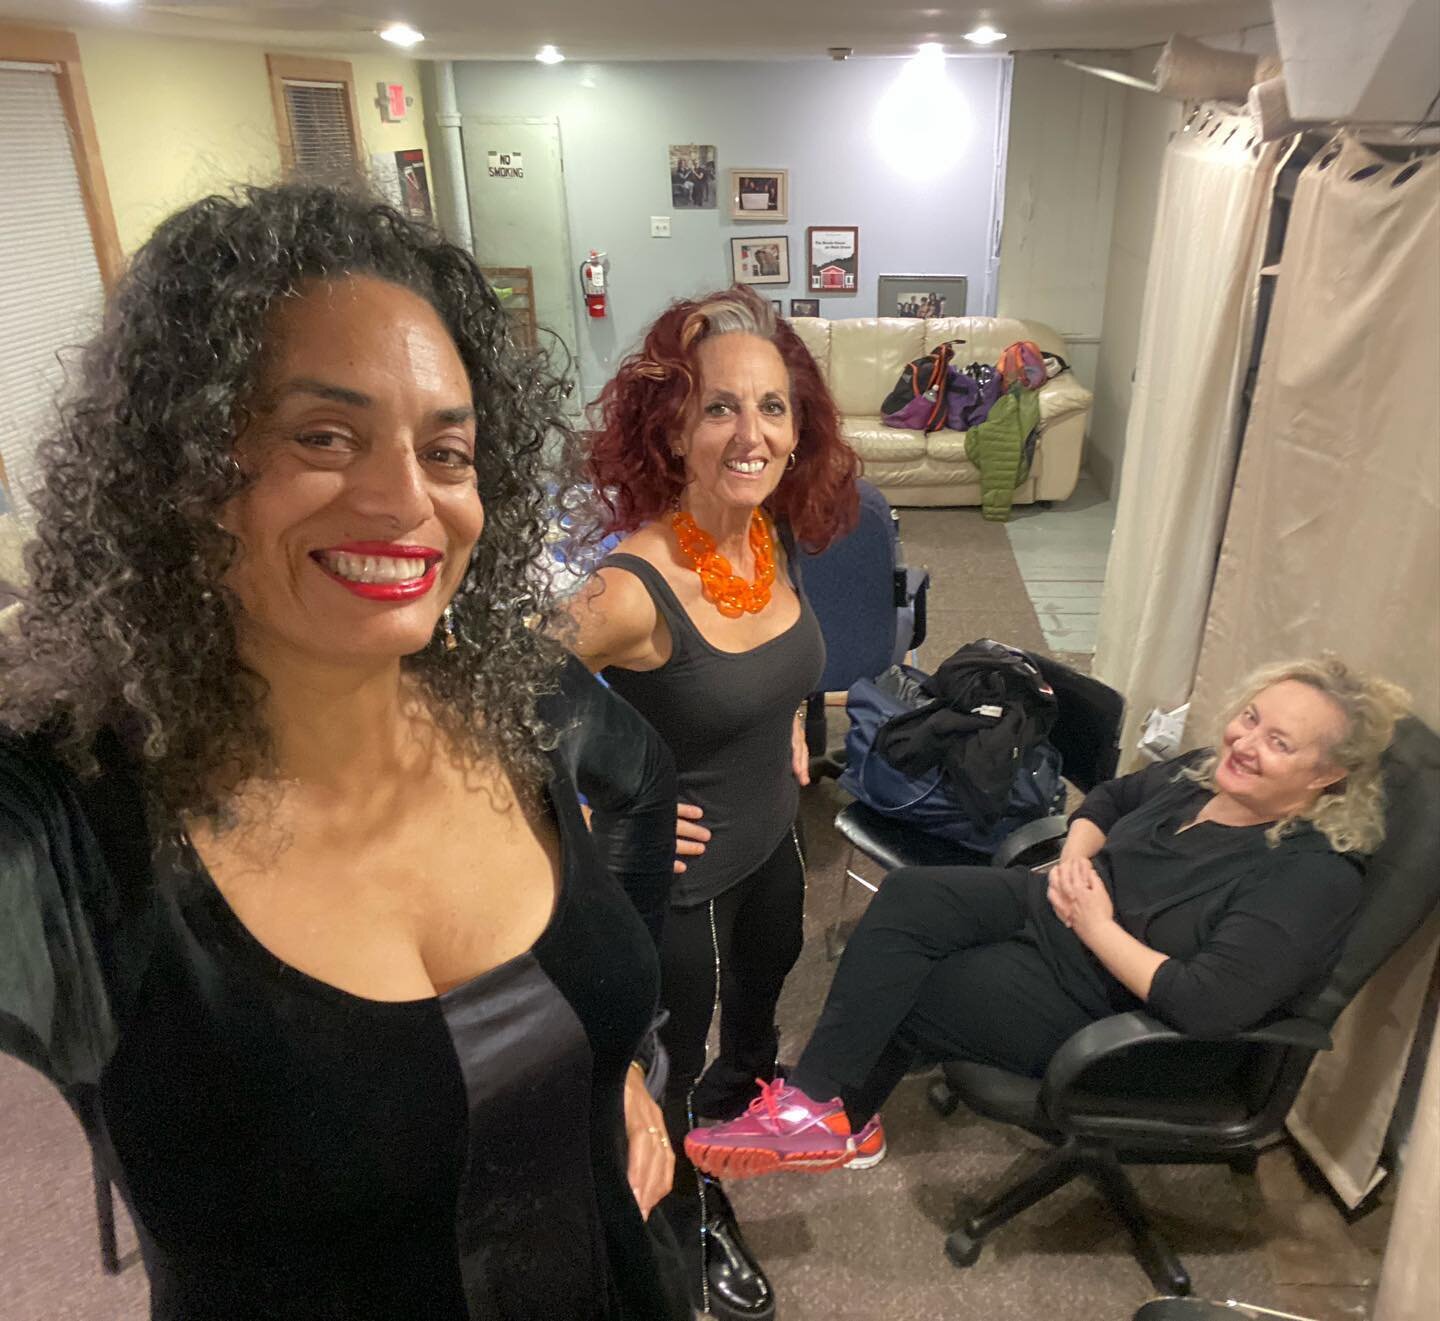 Backstage @rosendaletheatre What an amazing night and community! Dancers and revelry and a magical night of music! #bettyshow #rosendaleny special huge shoutout to Amy Summers!! ❤️